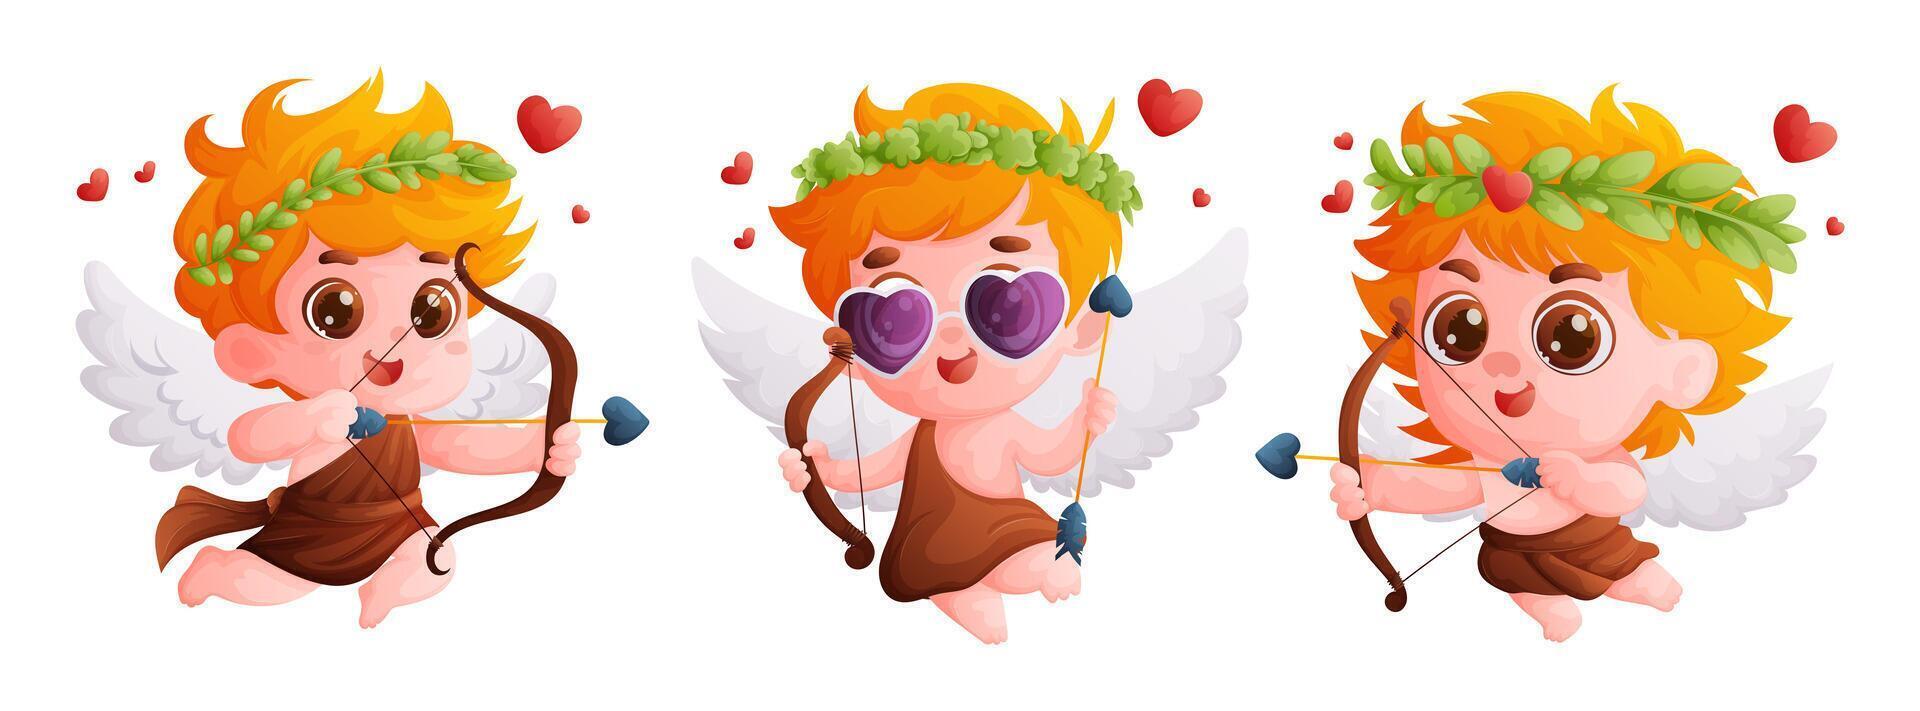 Set of floating cupids with bow and arrow. Symbol of Valentine's Day, a little boy with big wings gives love. Cartoon style, vector illustration.